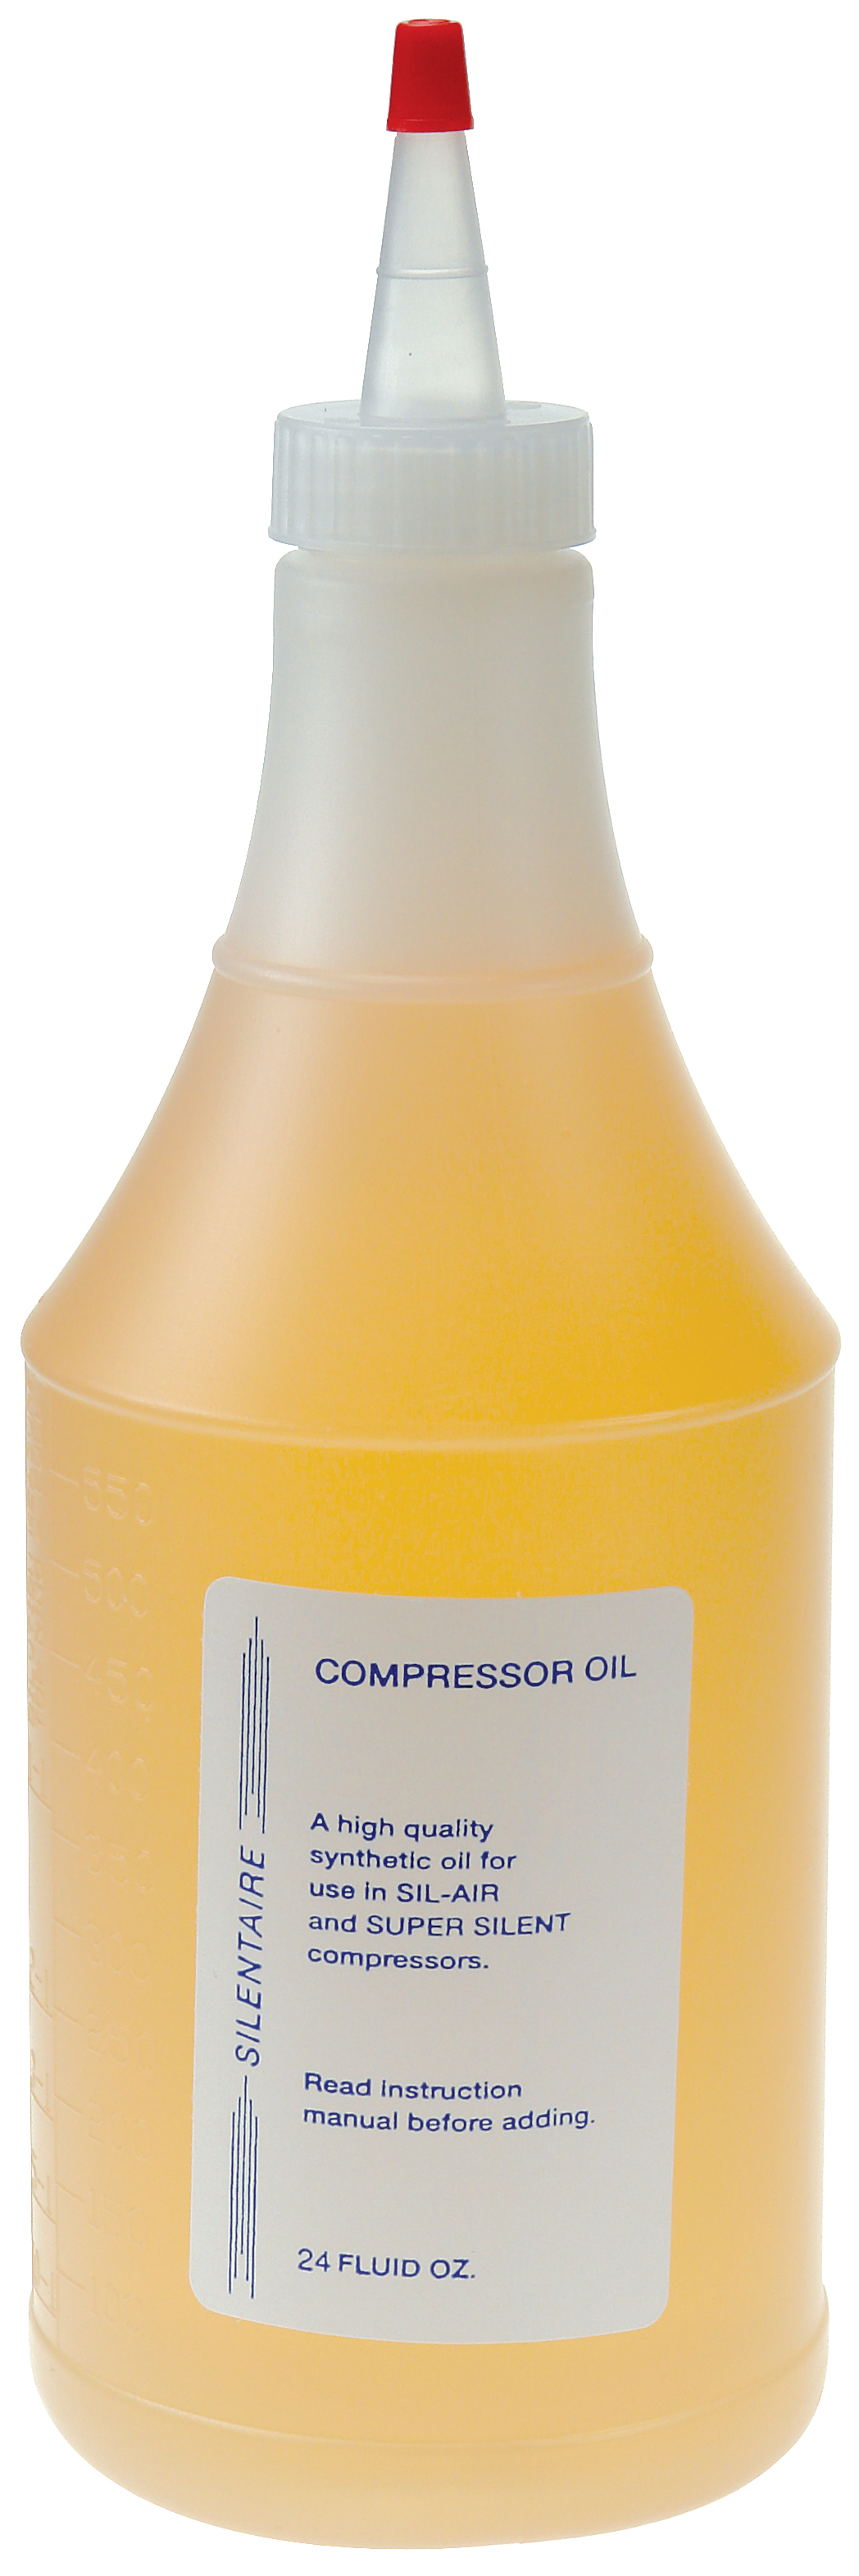 Oil for Silentaire compressors, approx. 700ml